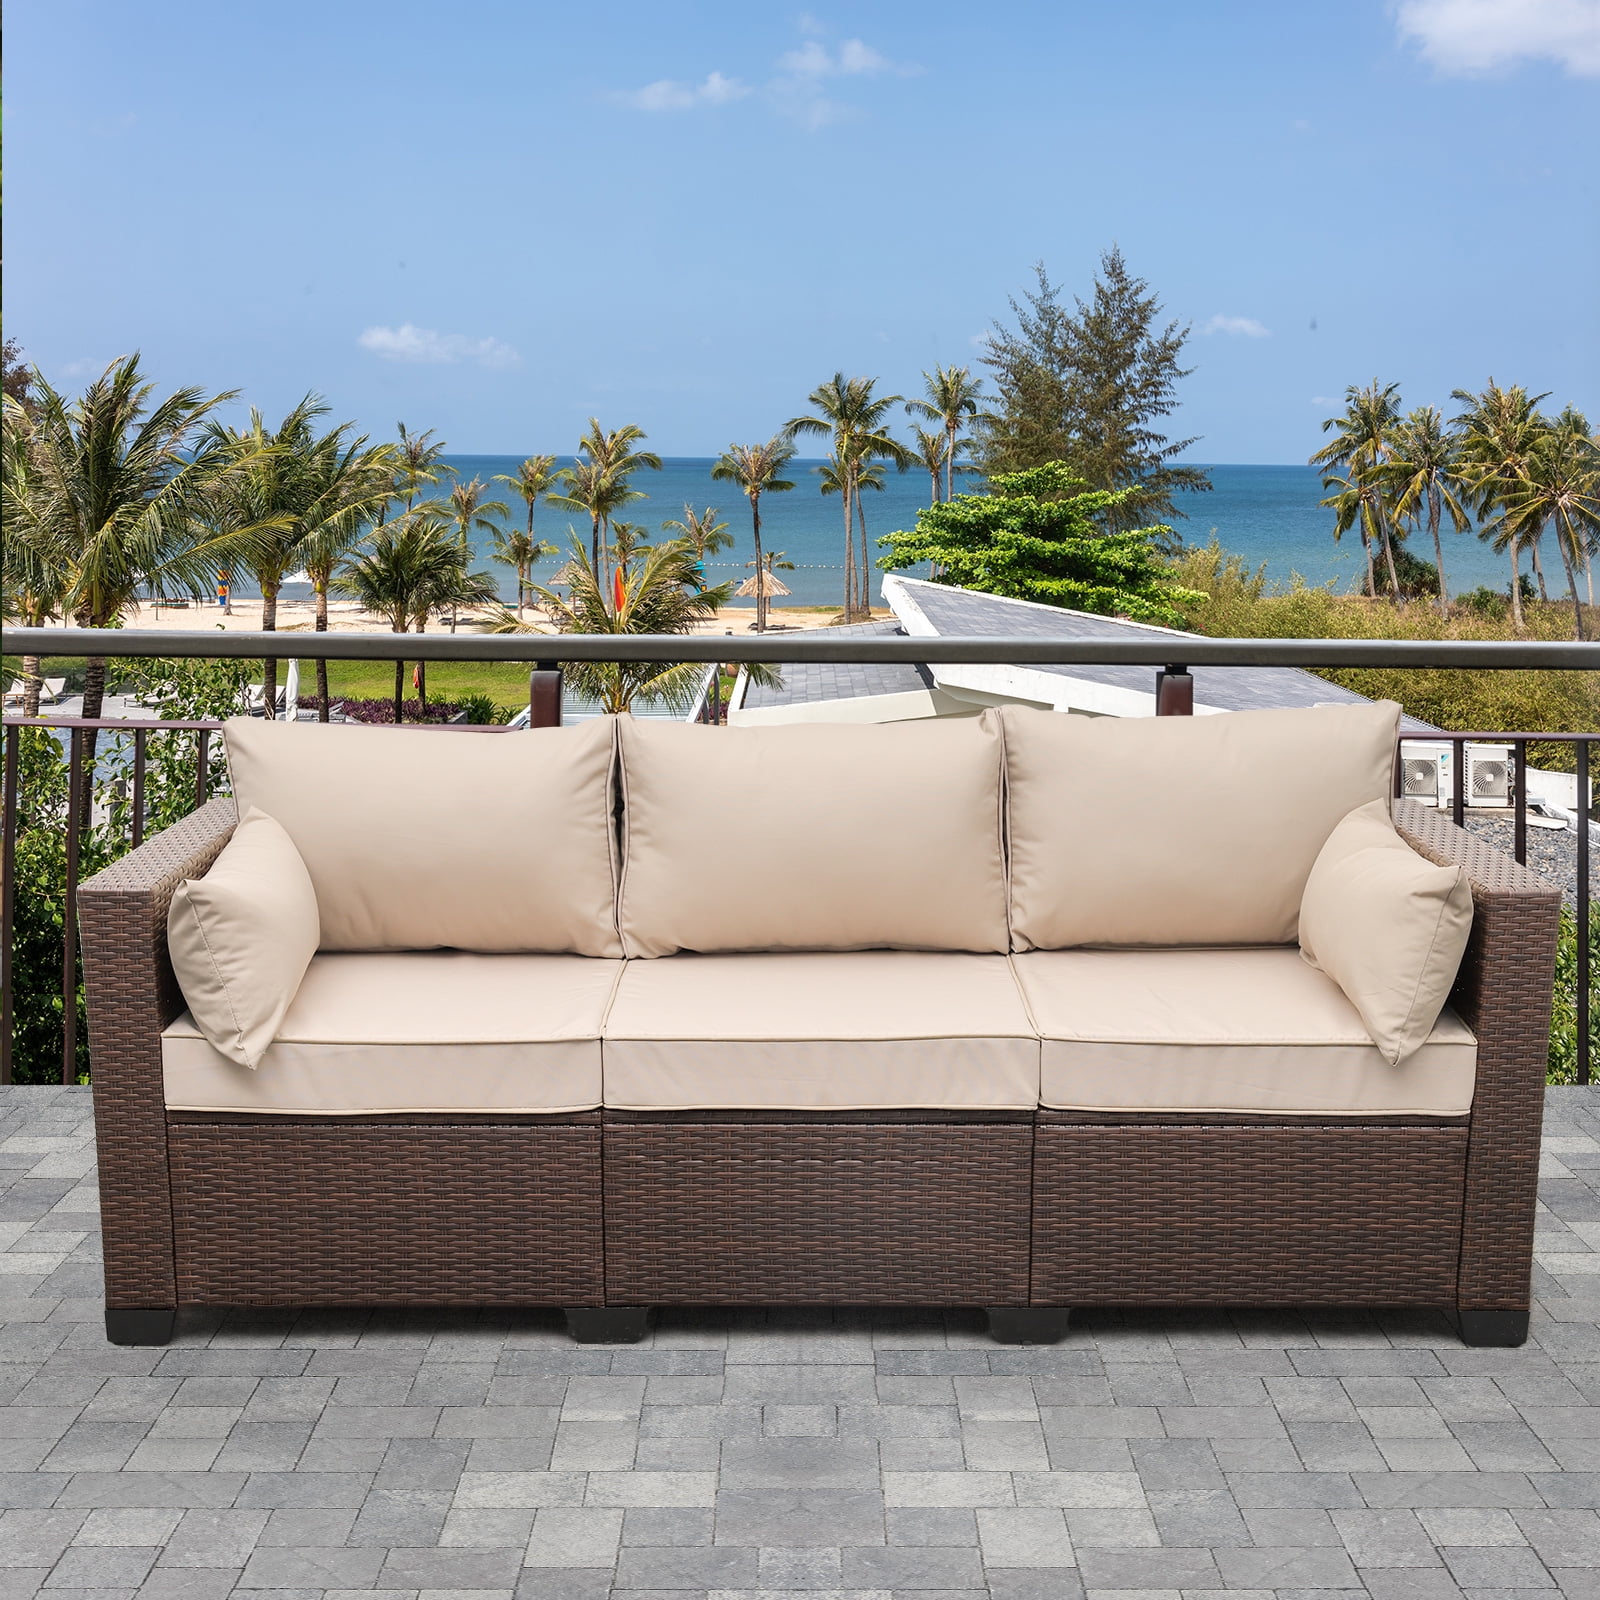 Waroom 3 Seat Patio Wicker Couch